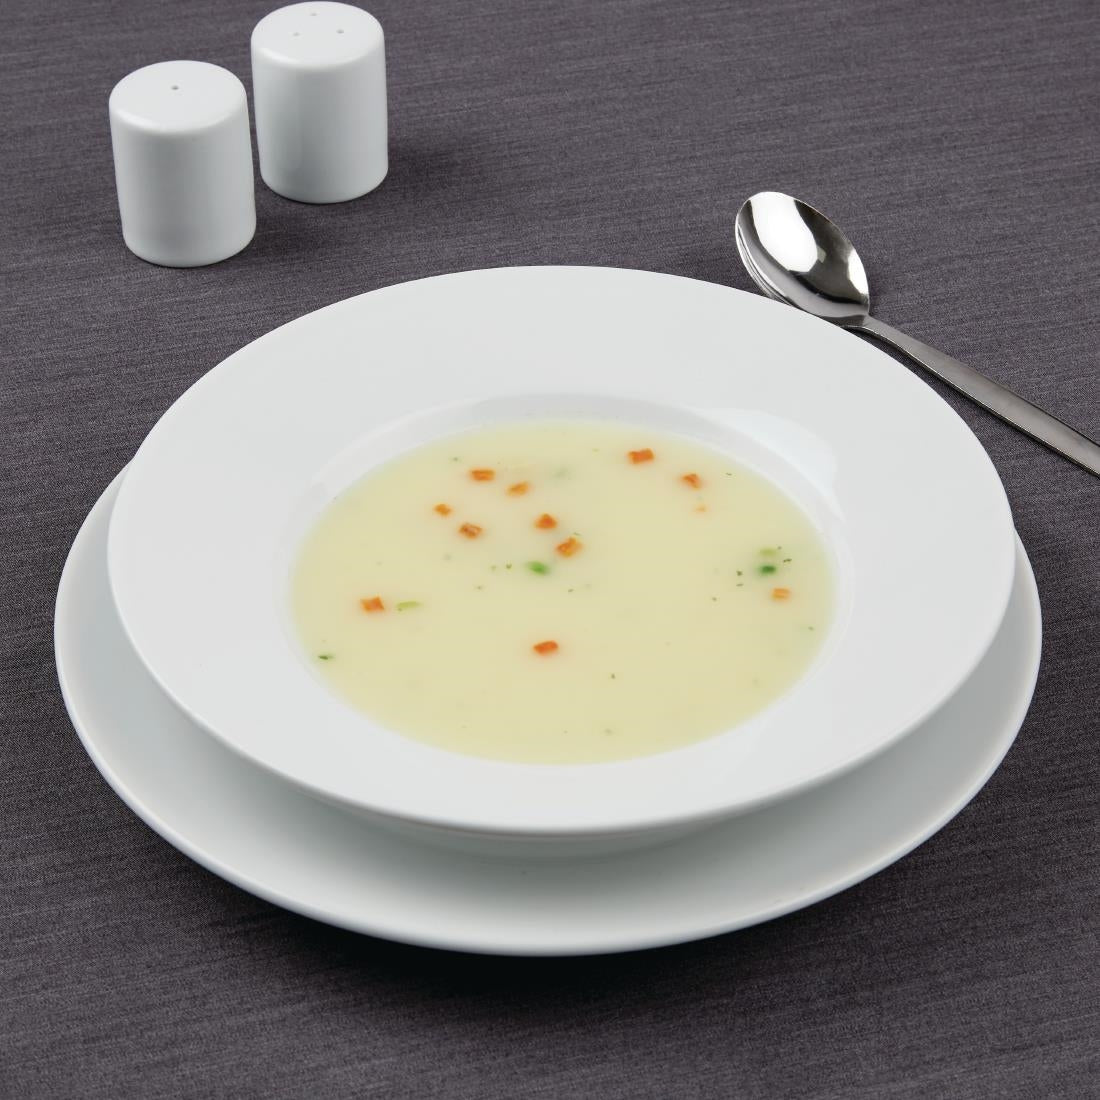 Athena Hotelware Rimmed Soup & Pasta Bowls 228mm 210ml (Pack of 6) JD Catering Equipment Solutions Ltd